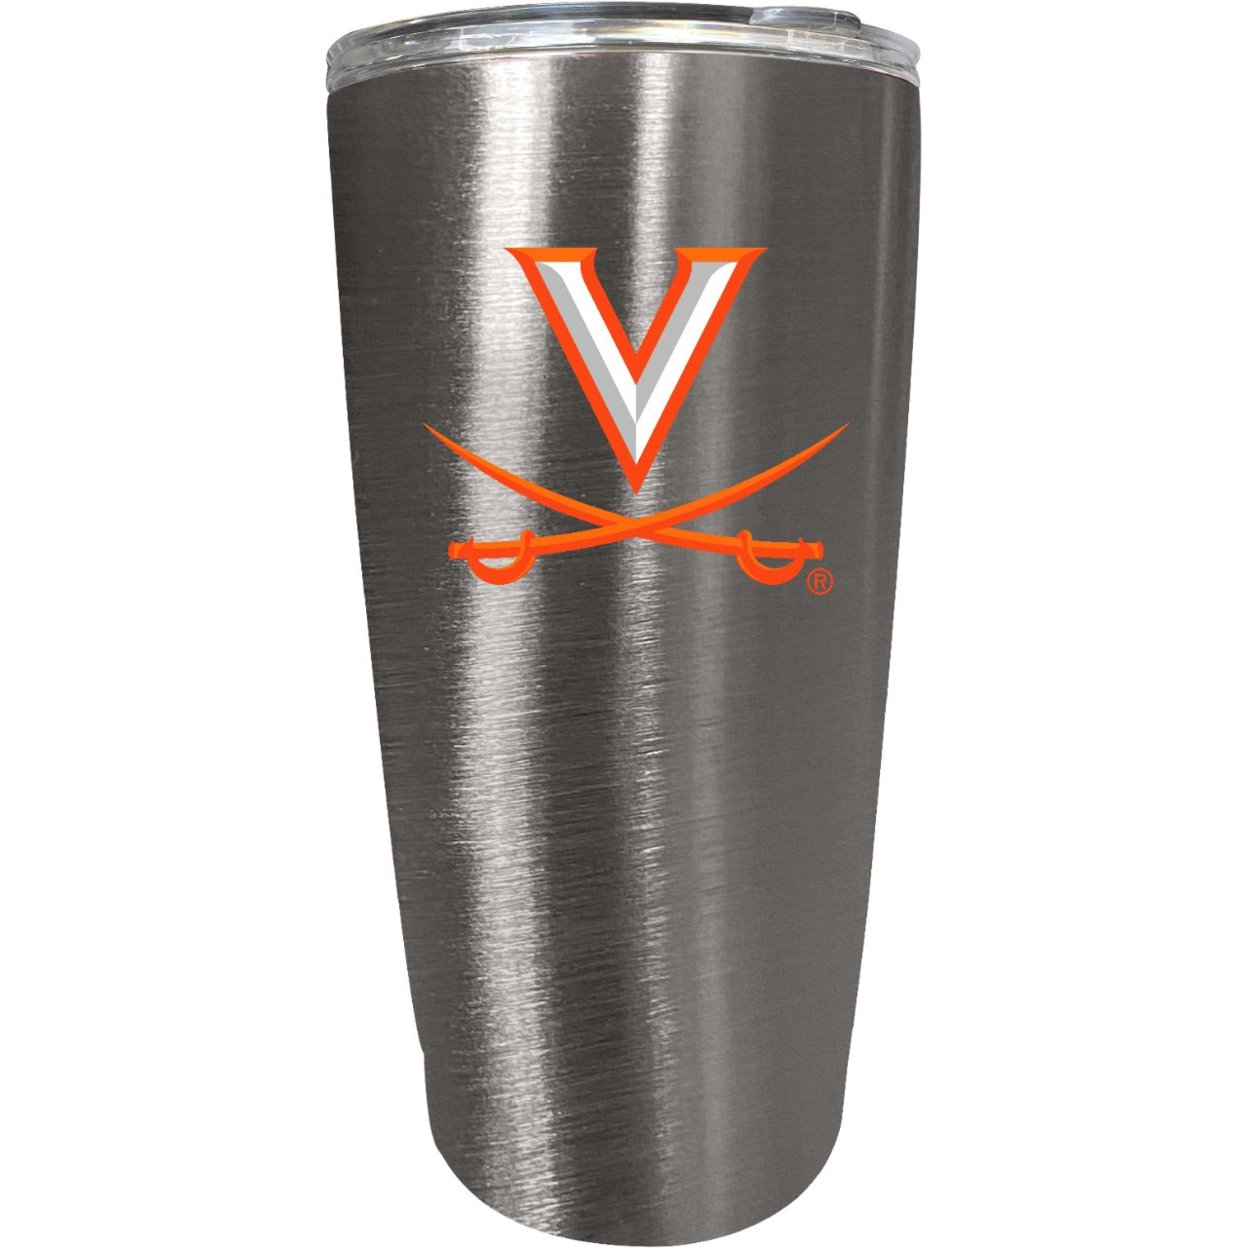 Virginia Cavaliers 16 Oz Insulated Stainless Steel Tumbler Colorless